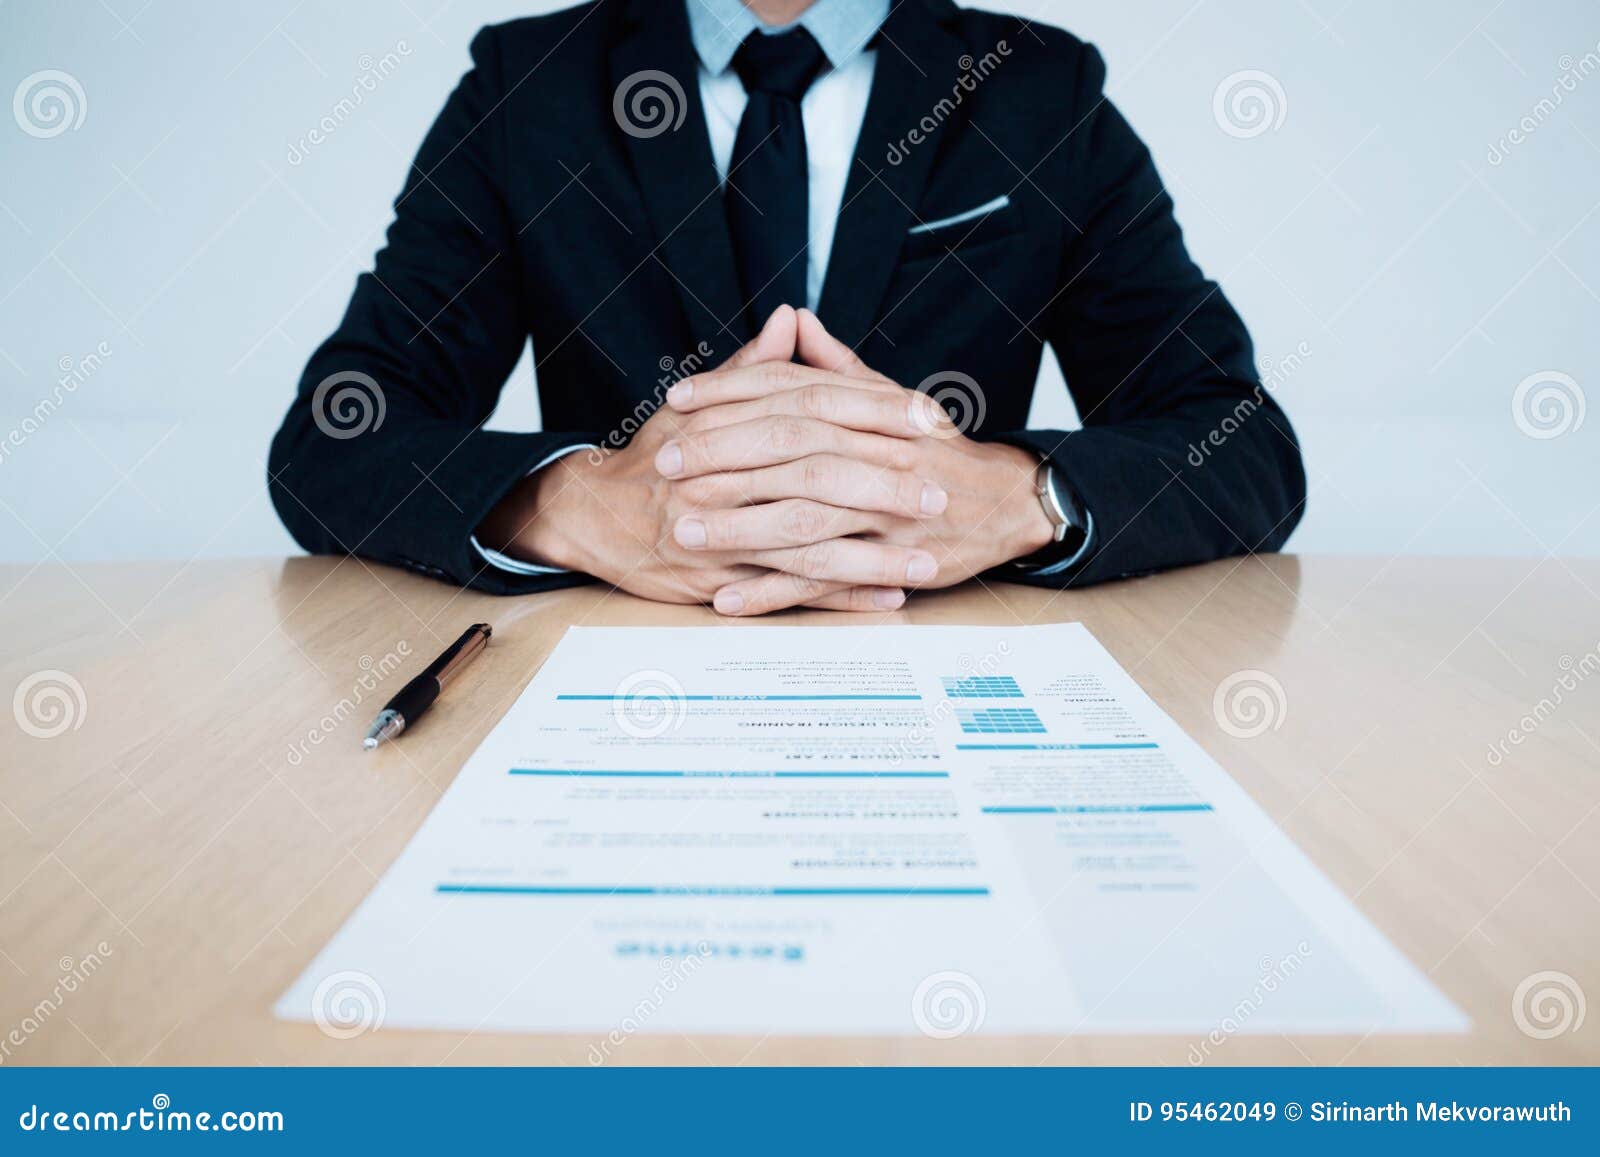 business job interview. hr and resume of applicant on table.